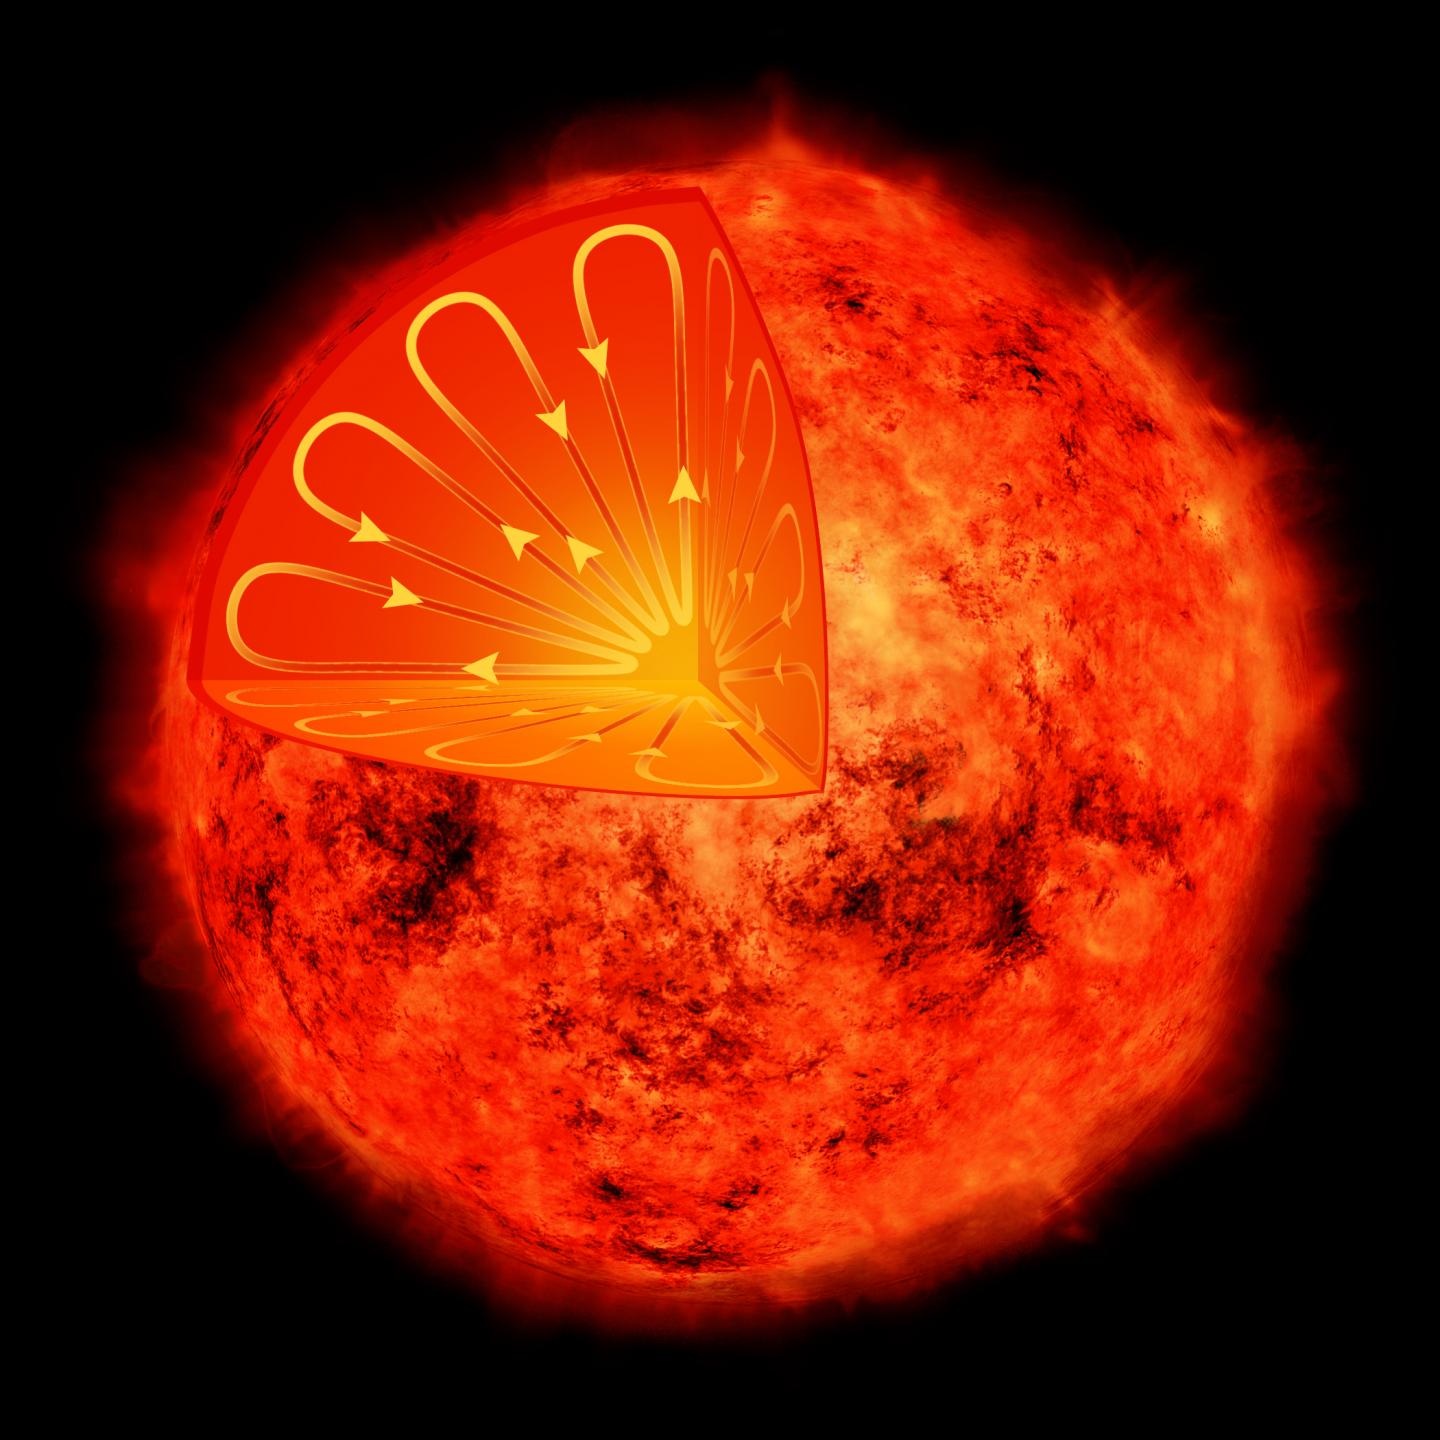 Interior of a Low-Mass Star